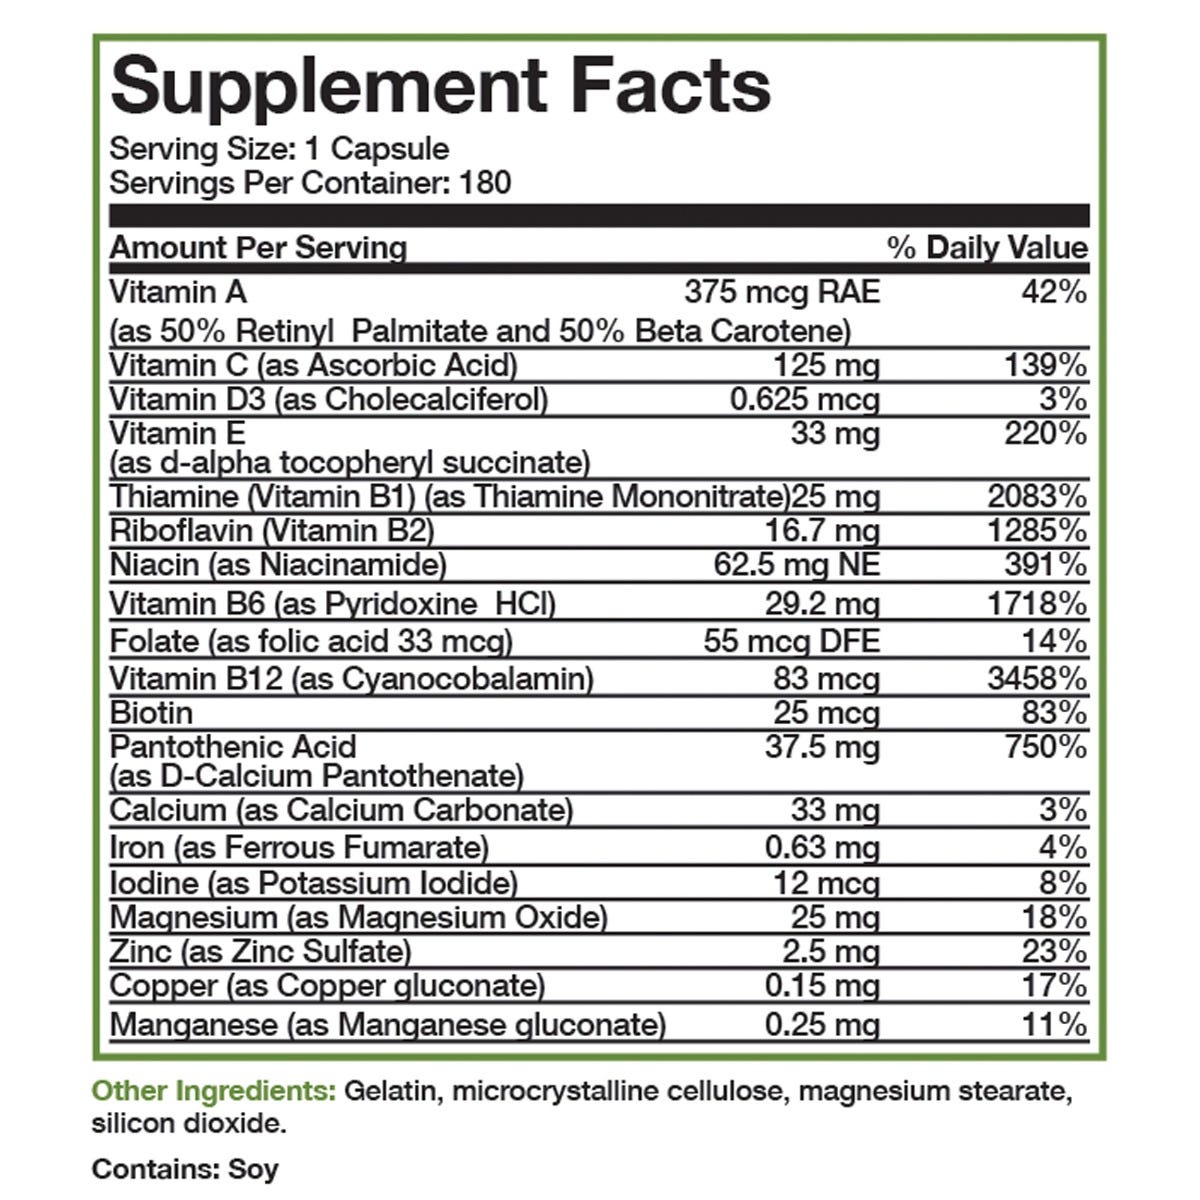 Bronson Vitamins Once Daily Multivitamin and Mineral - 180 Capsules, Item #123, Supplement Facts Panel